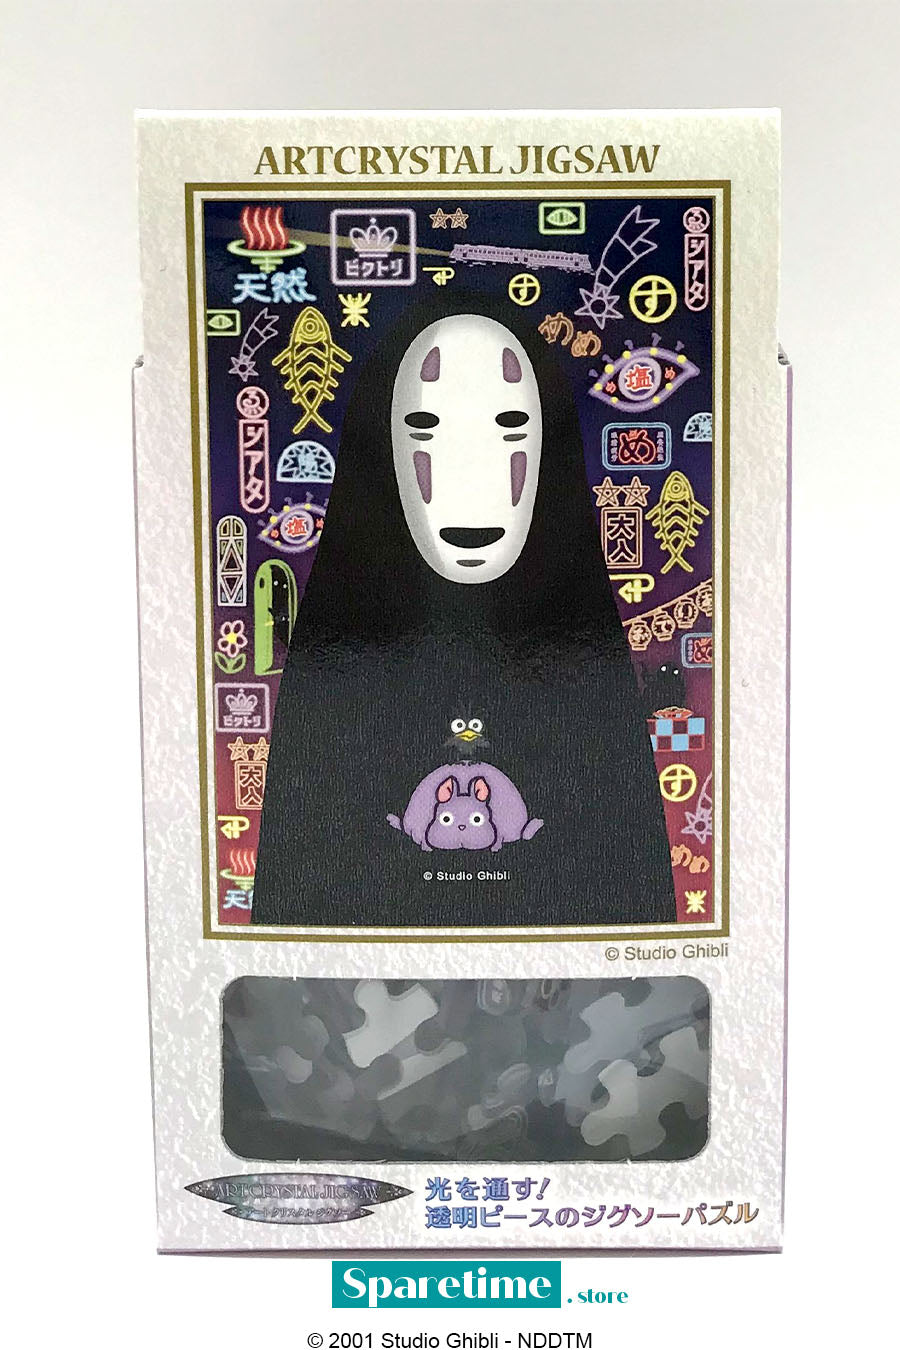 No Face and Mysterious Street Lights "Spirited Away", Ensky Petite Artcrystal Puzzle 126-AC66